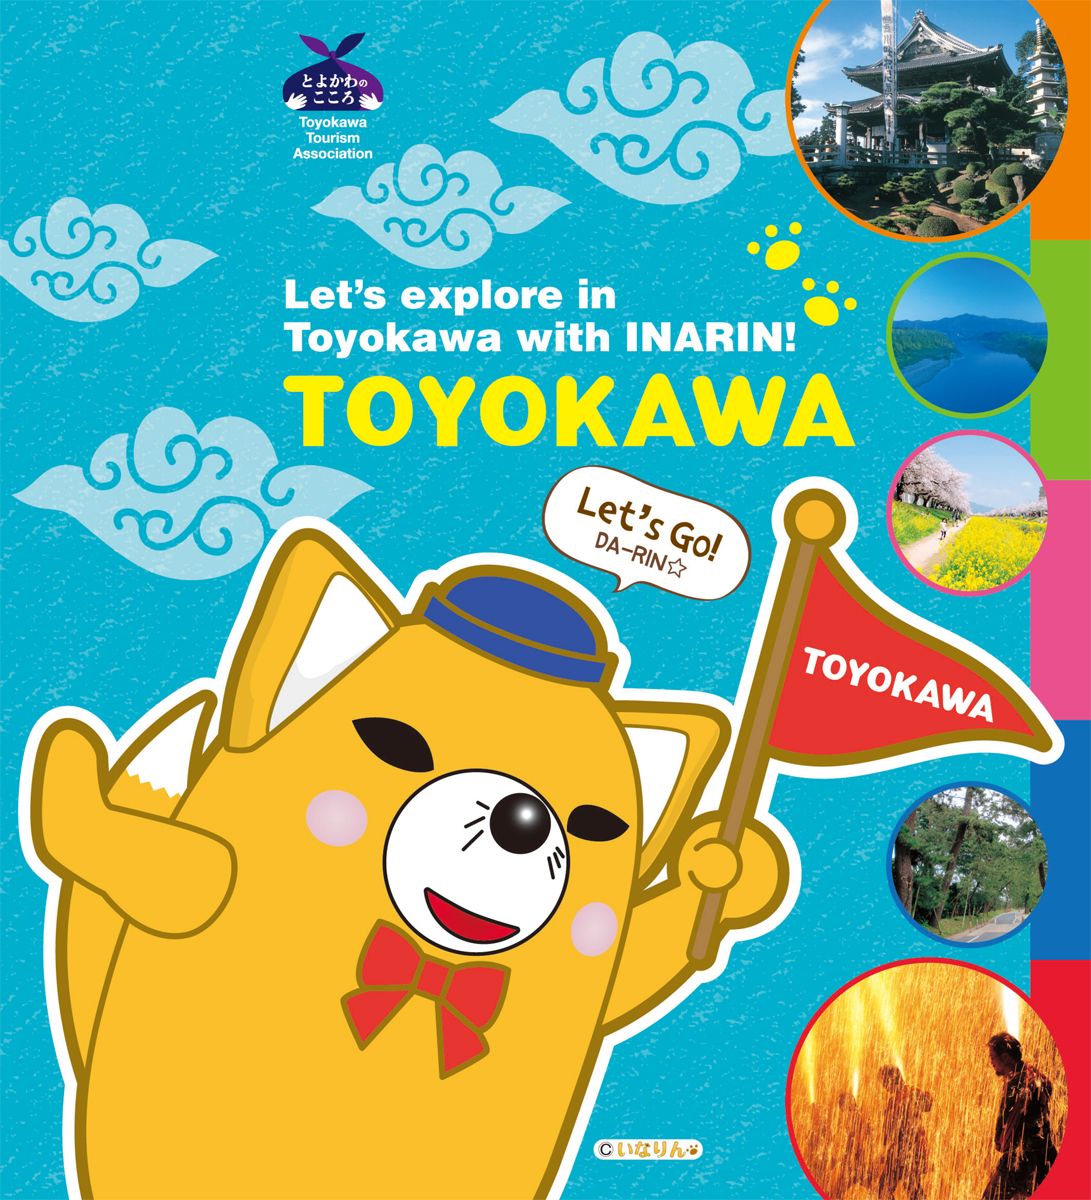 Let's explore in Toyokawa with INARIN!